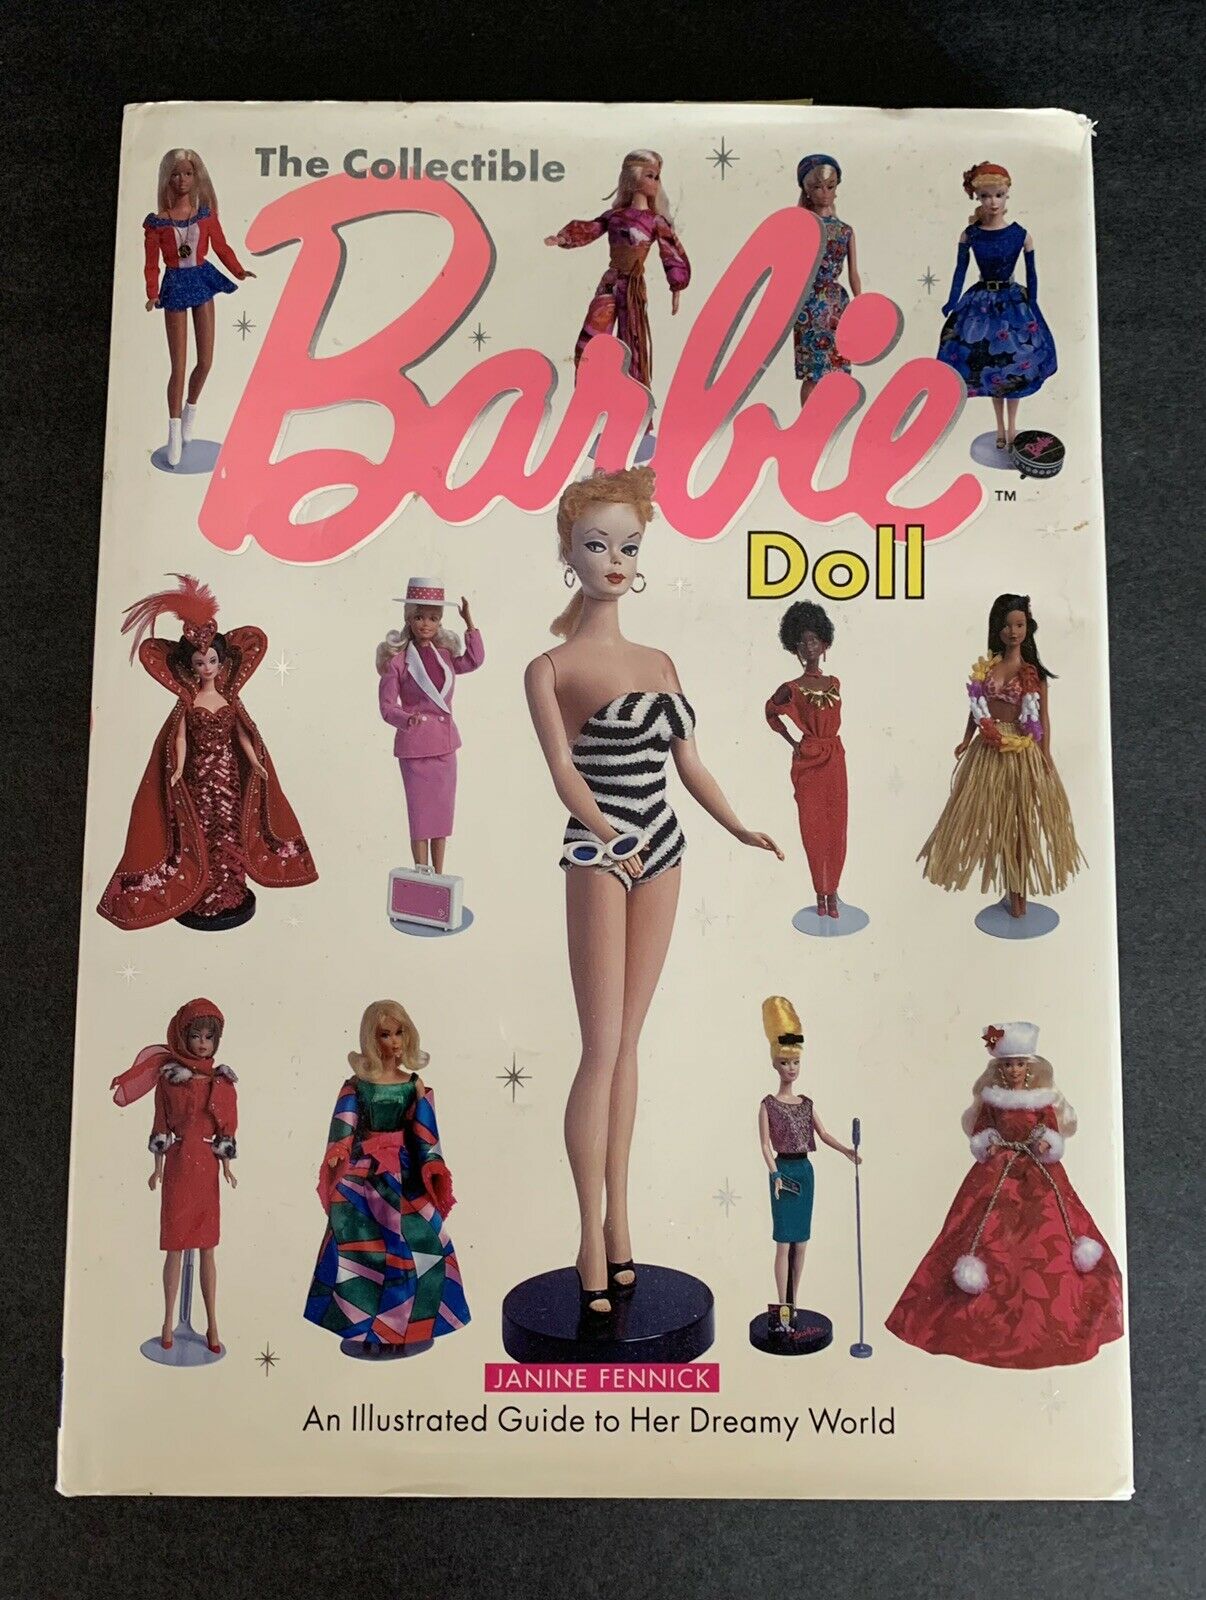 The Collectible Barbie Doll Book By Janine Fennick Hardcover Dust Jacket